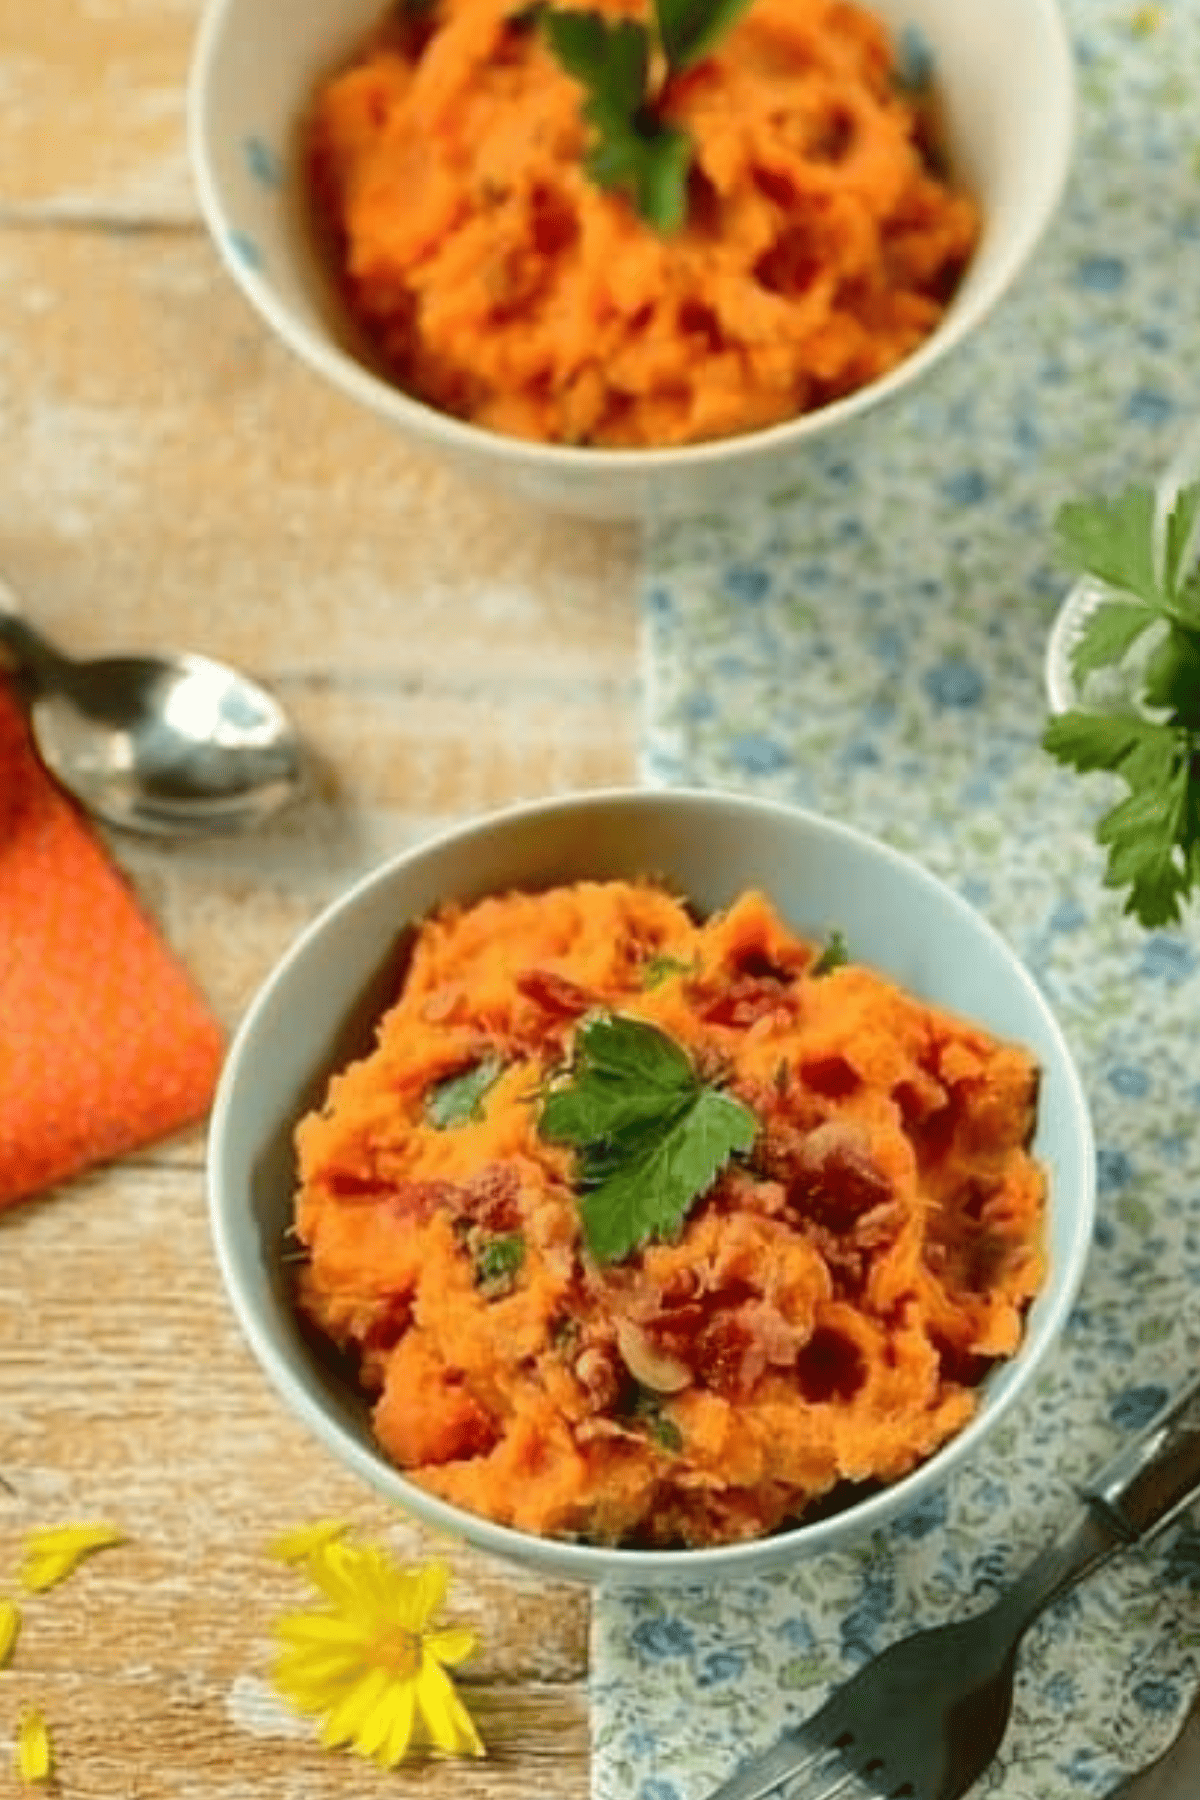 Savory mashed sweet potatoes with coconut milk, bacon, and cilantro in bowls.